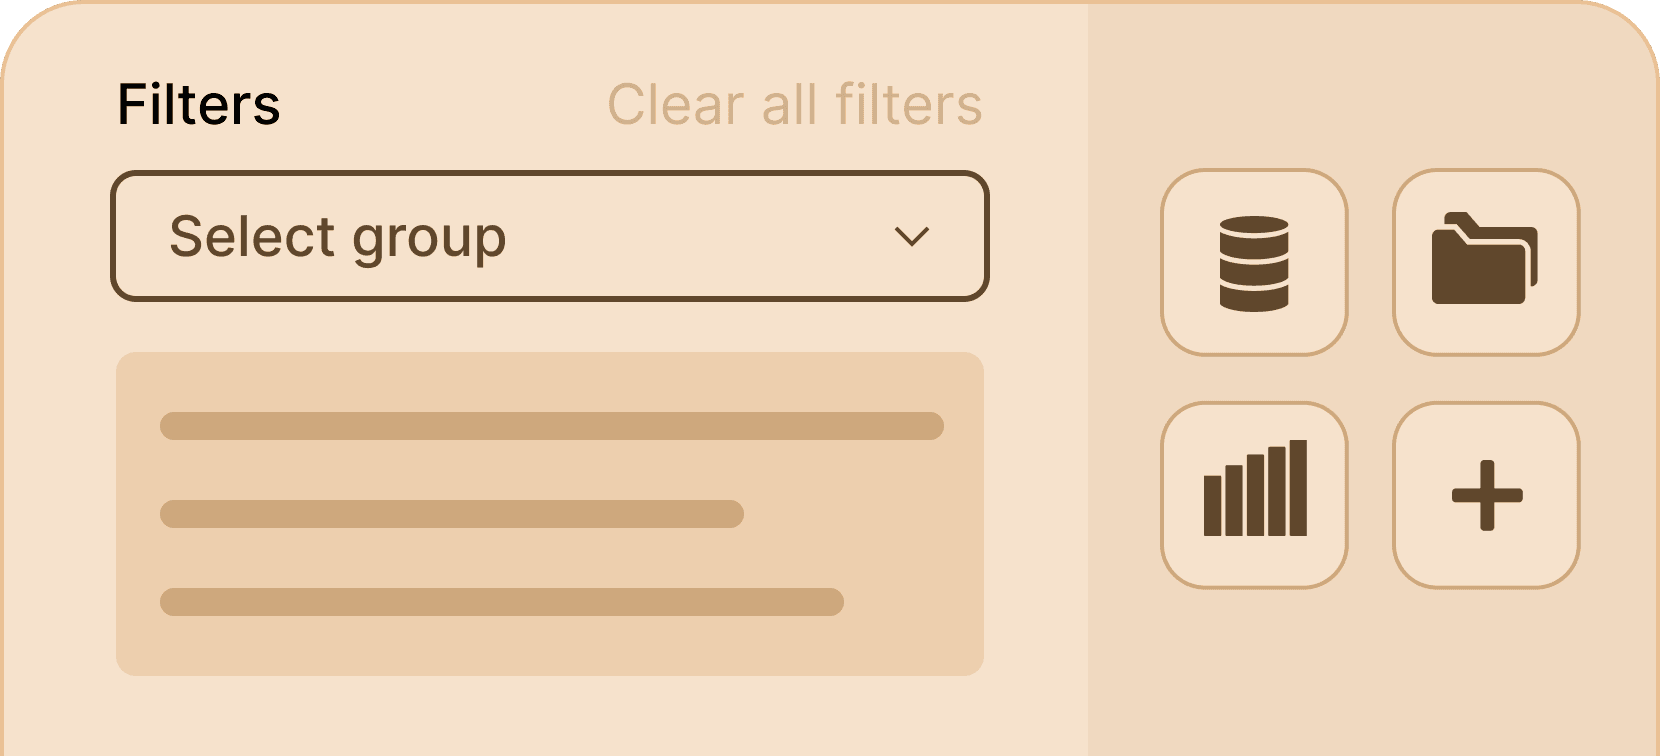 Use data filters - Certifier features